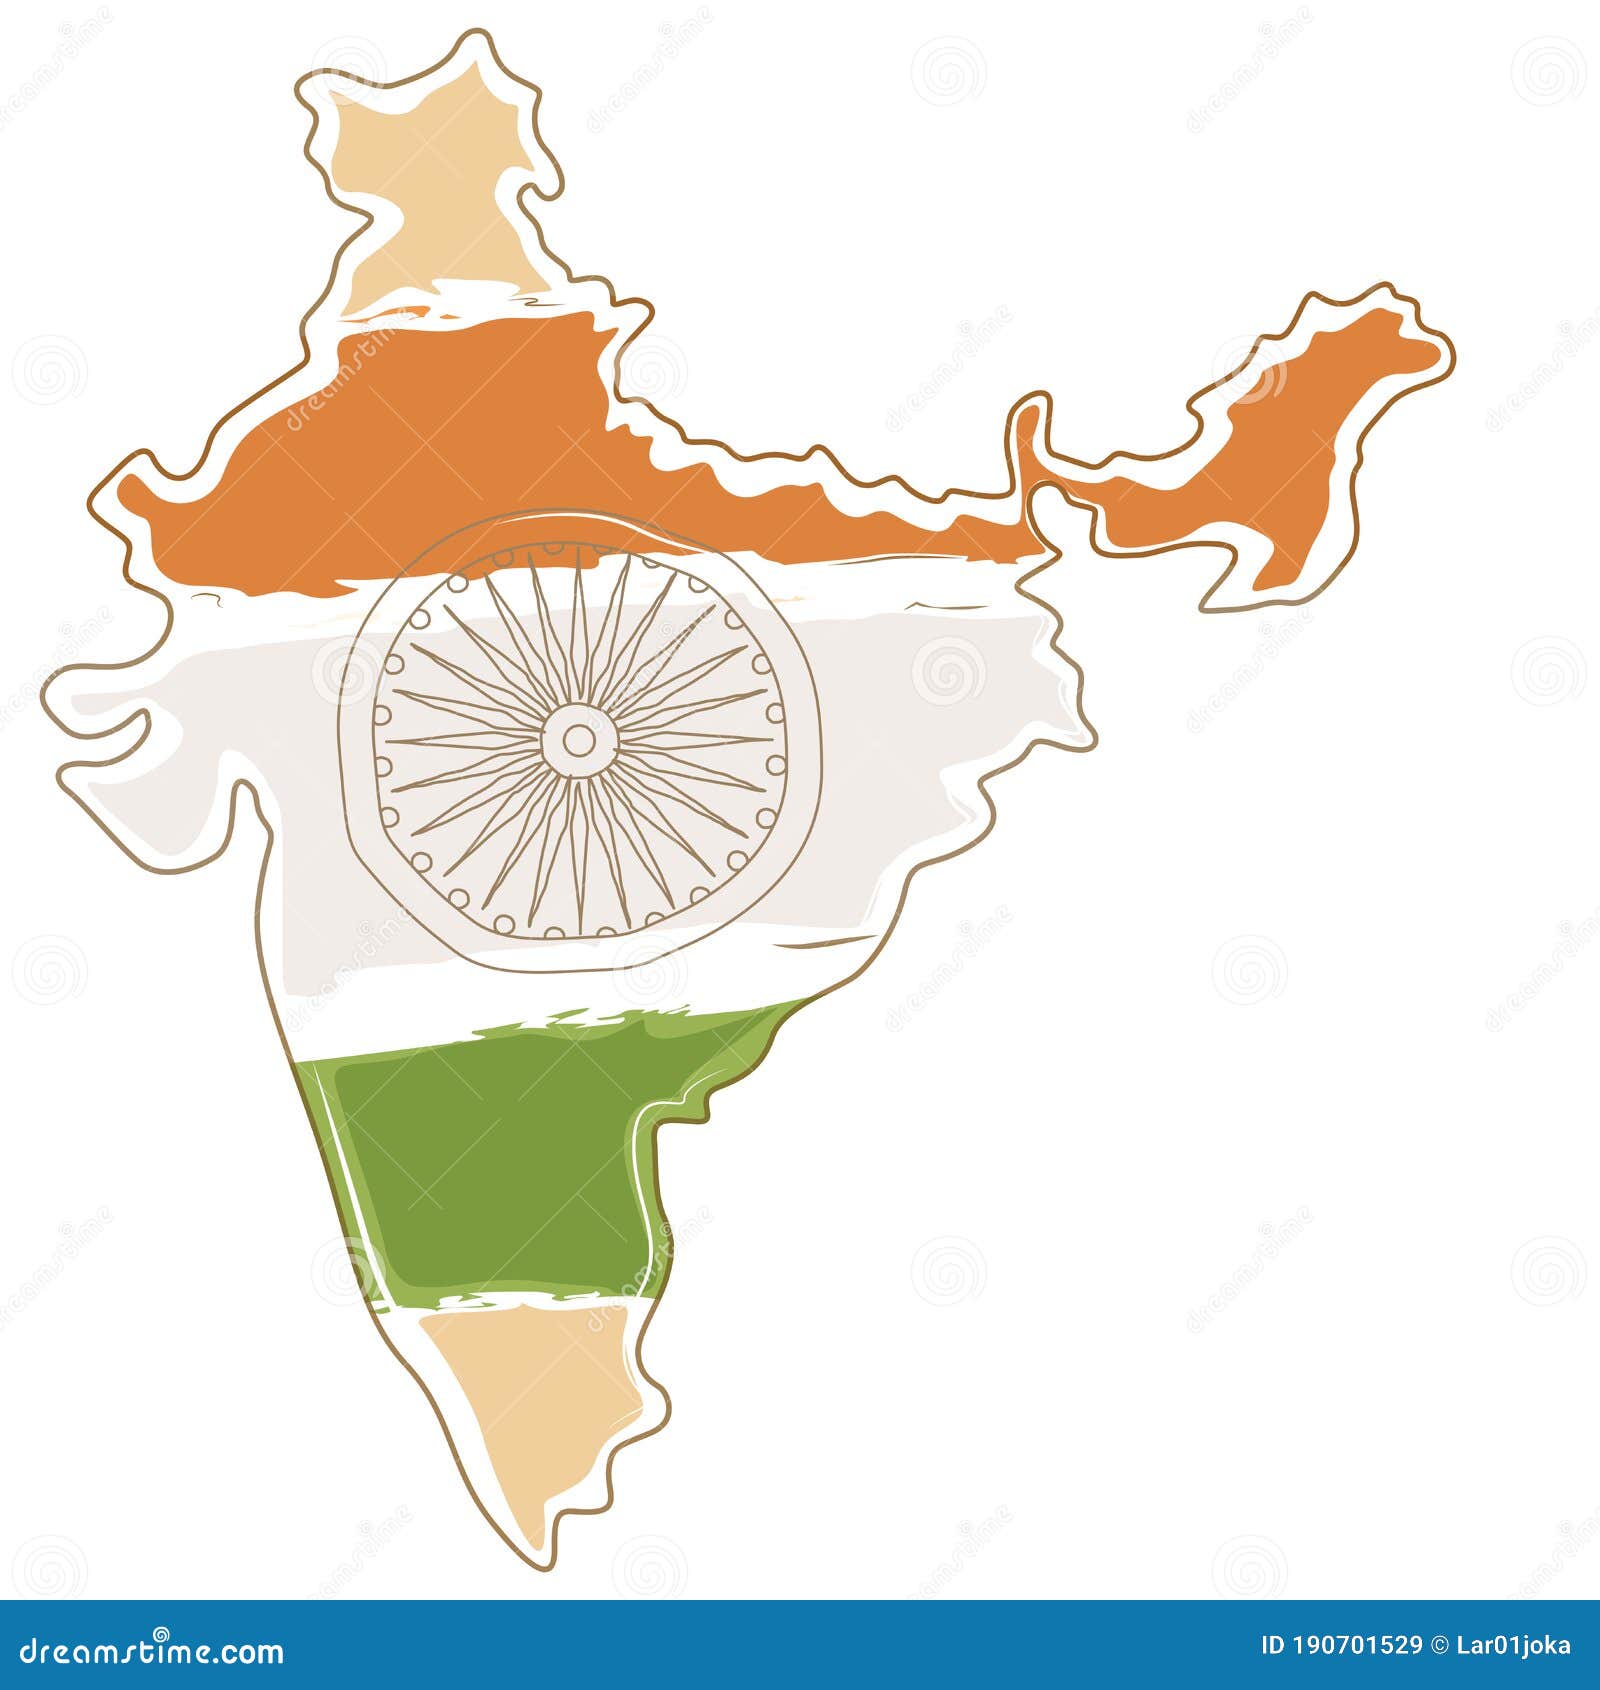 doodle freehand drawing of india map. | India map, Map sketch, World map  coloring page